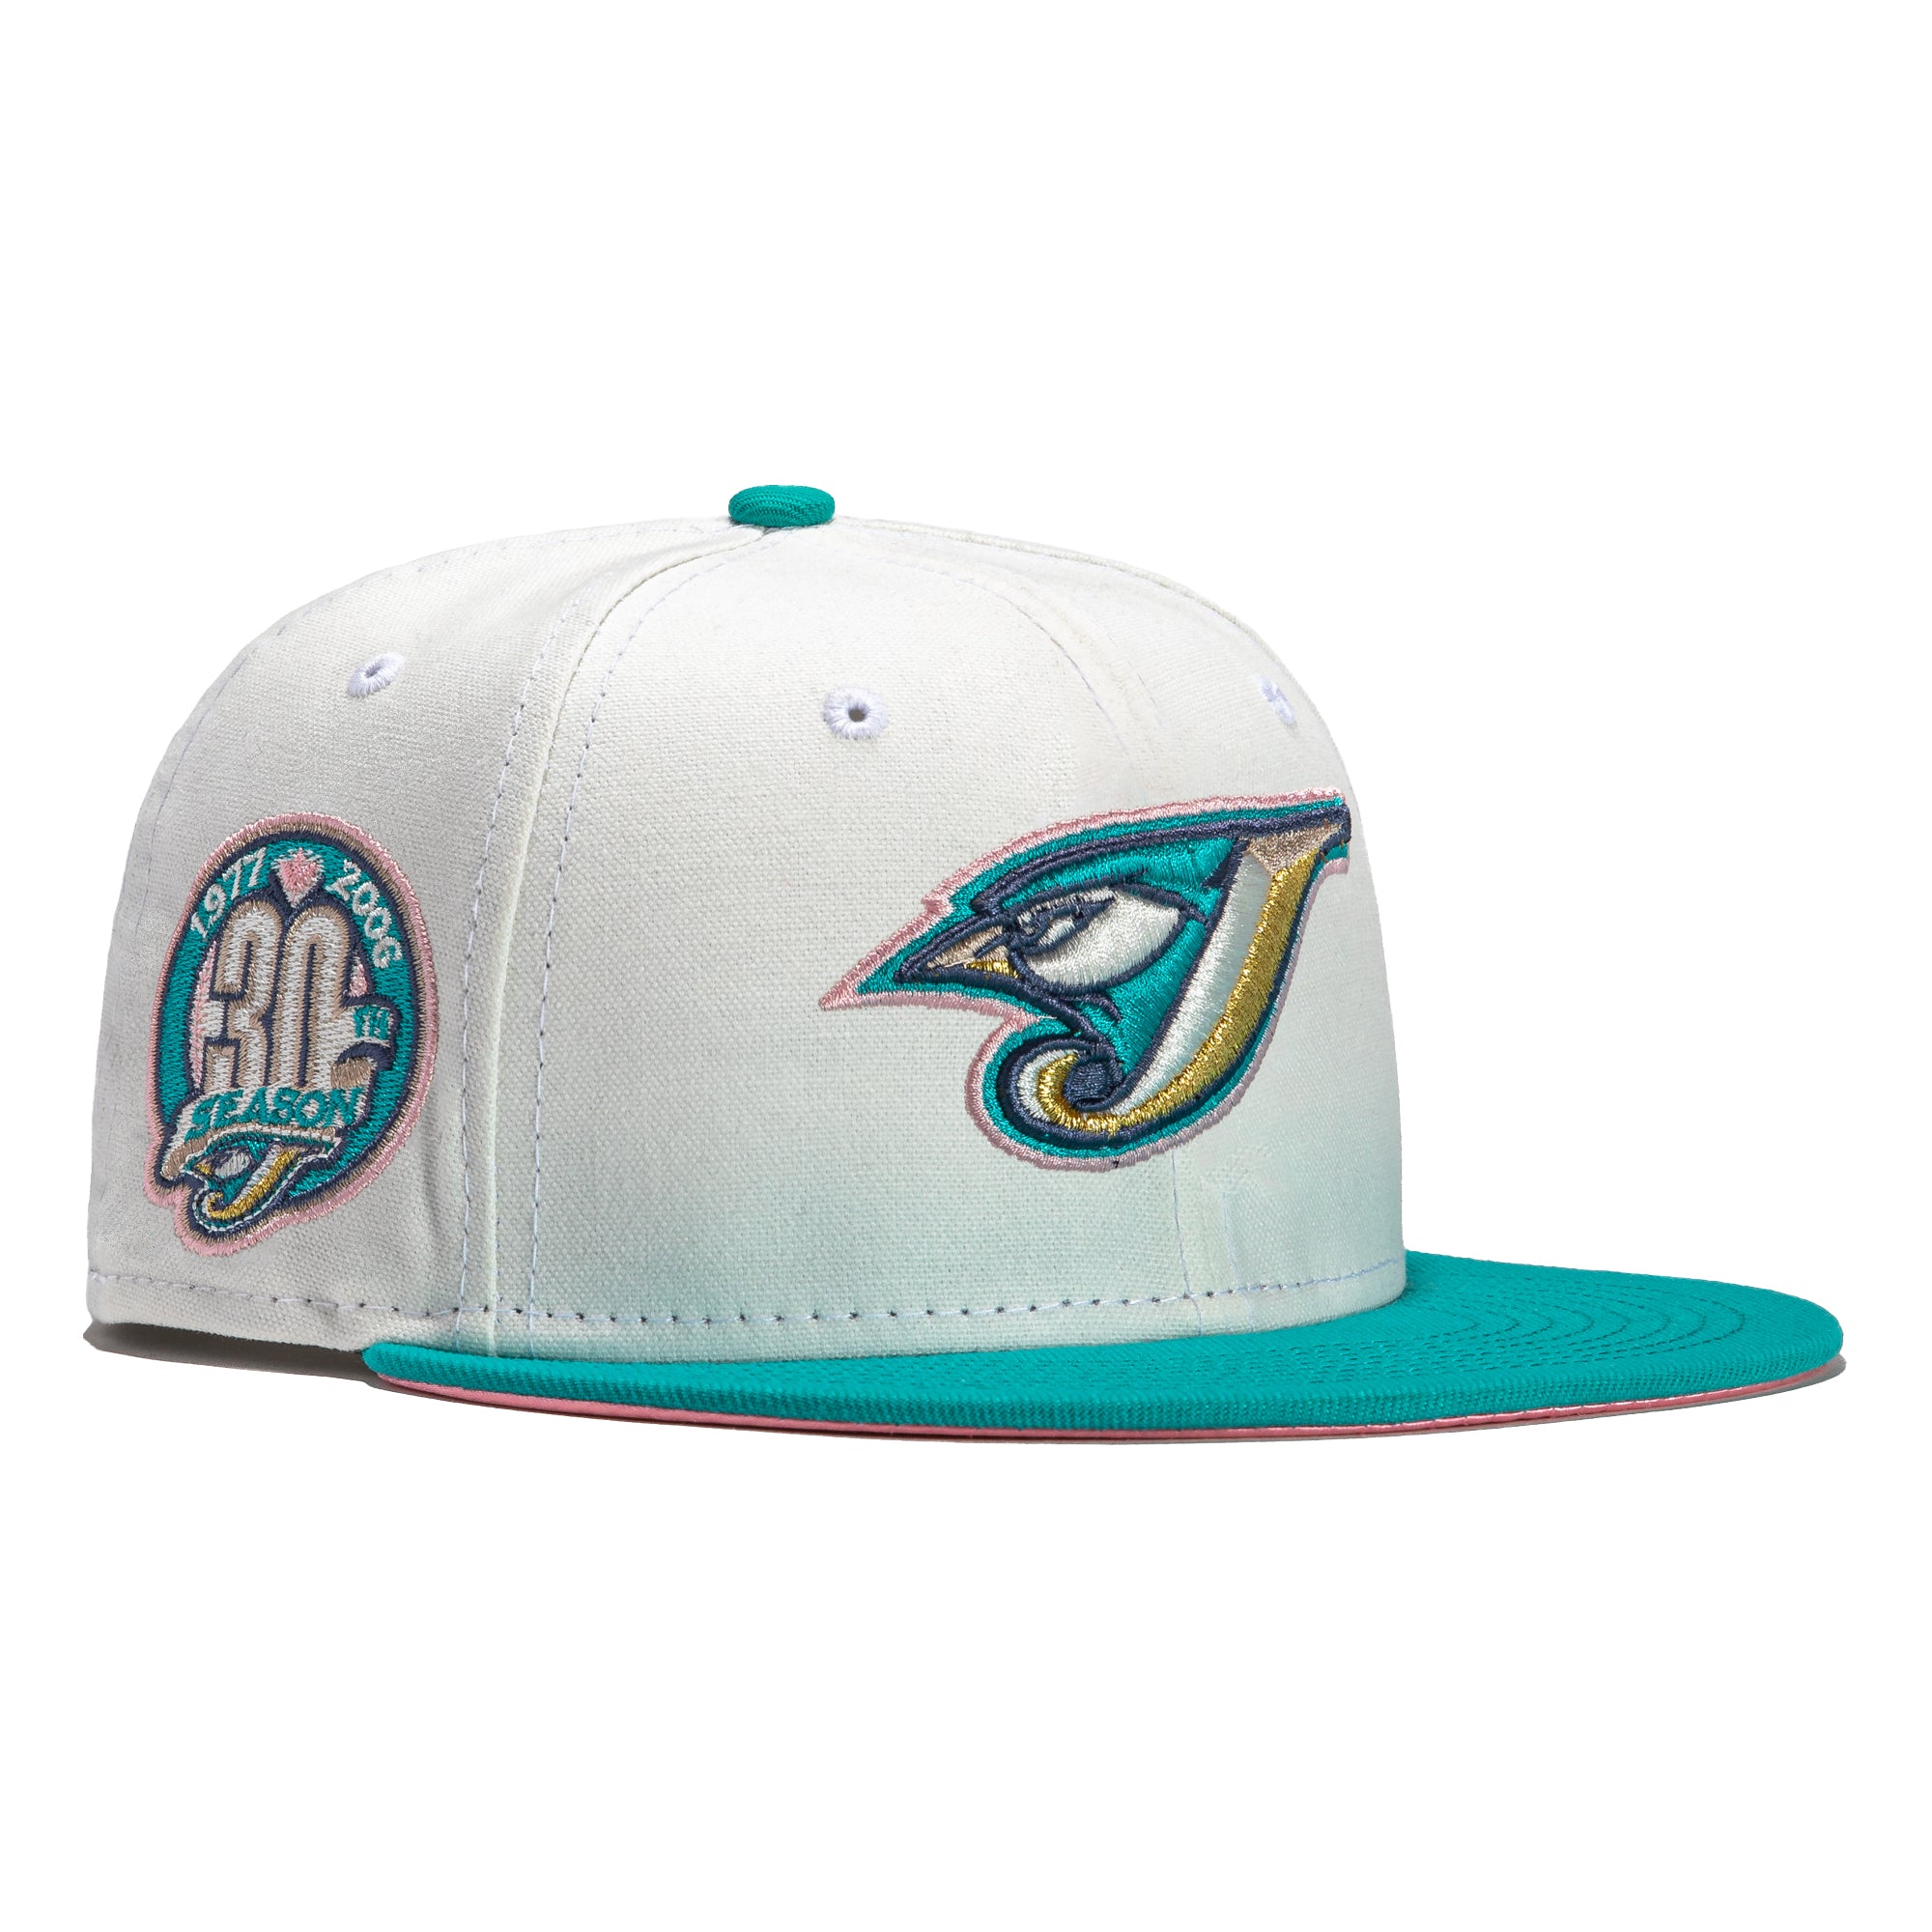 New Era 59FIFTY Monaco Toronto Blue Jays 30th Anniversary Patch Hat - Stone, Teal Stone/Teal / 7 5/8